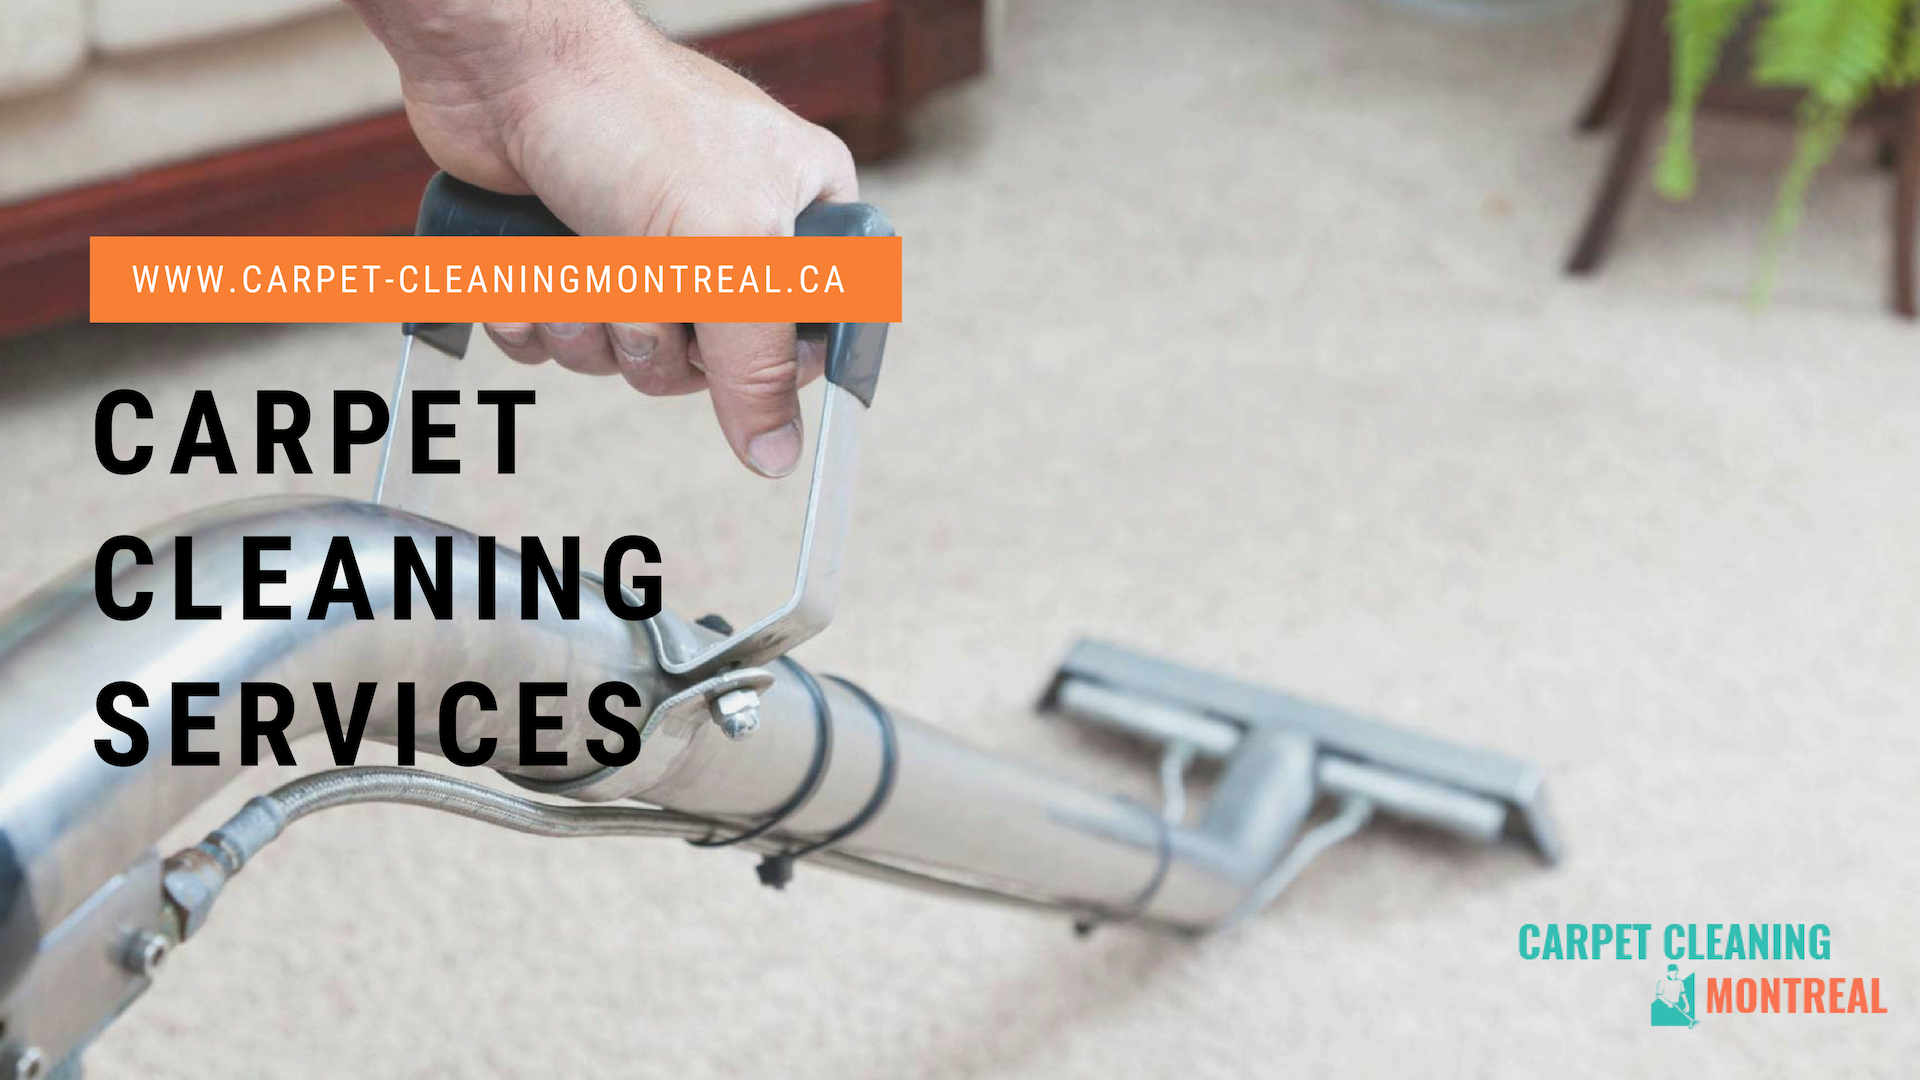 Carpet Cleaning Service Montreal